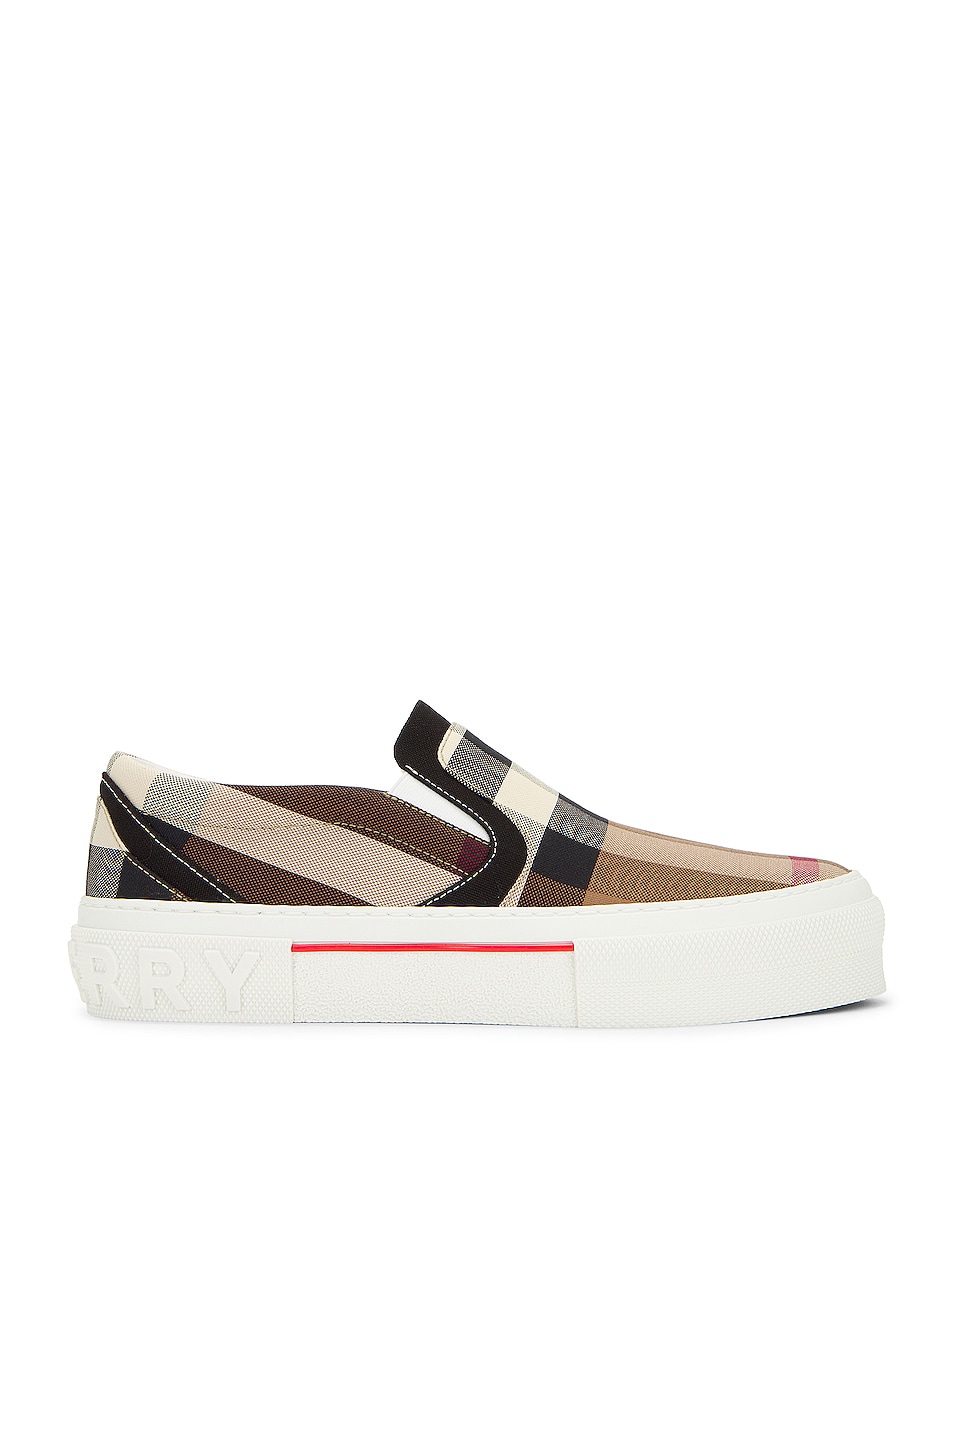 Image 1 of Burberry Curt Check Slip On Sneaker in Birch Brown Ip Chk